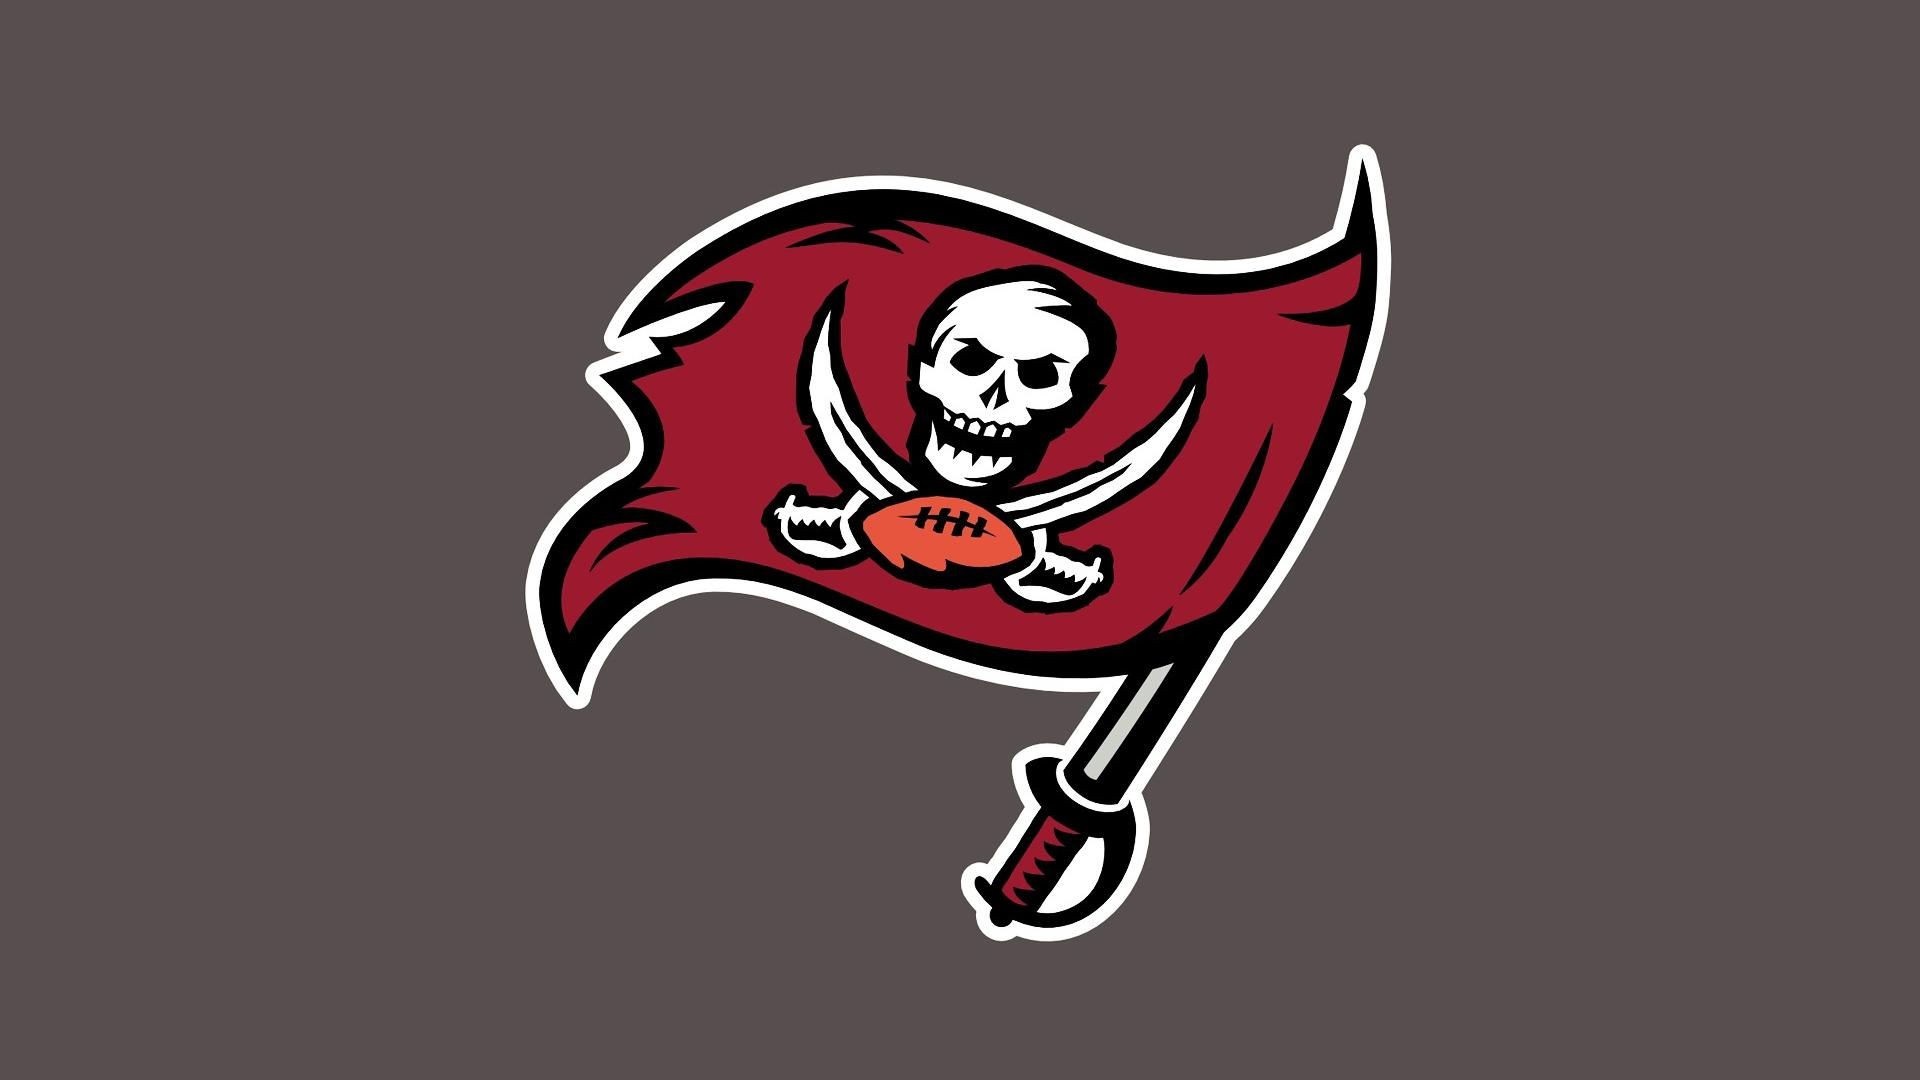 HD Desktop Wallpaper Tampa Bay Buccaneers Logo with high-resolution 1920x1080 pixel. You can use this wallpaper for your Mac or Windows Desktop Background, iPhone, Android or Tablet and another Smartphone device